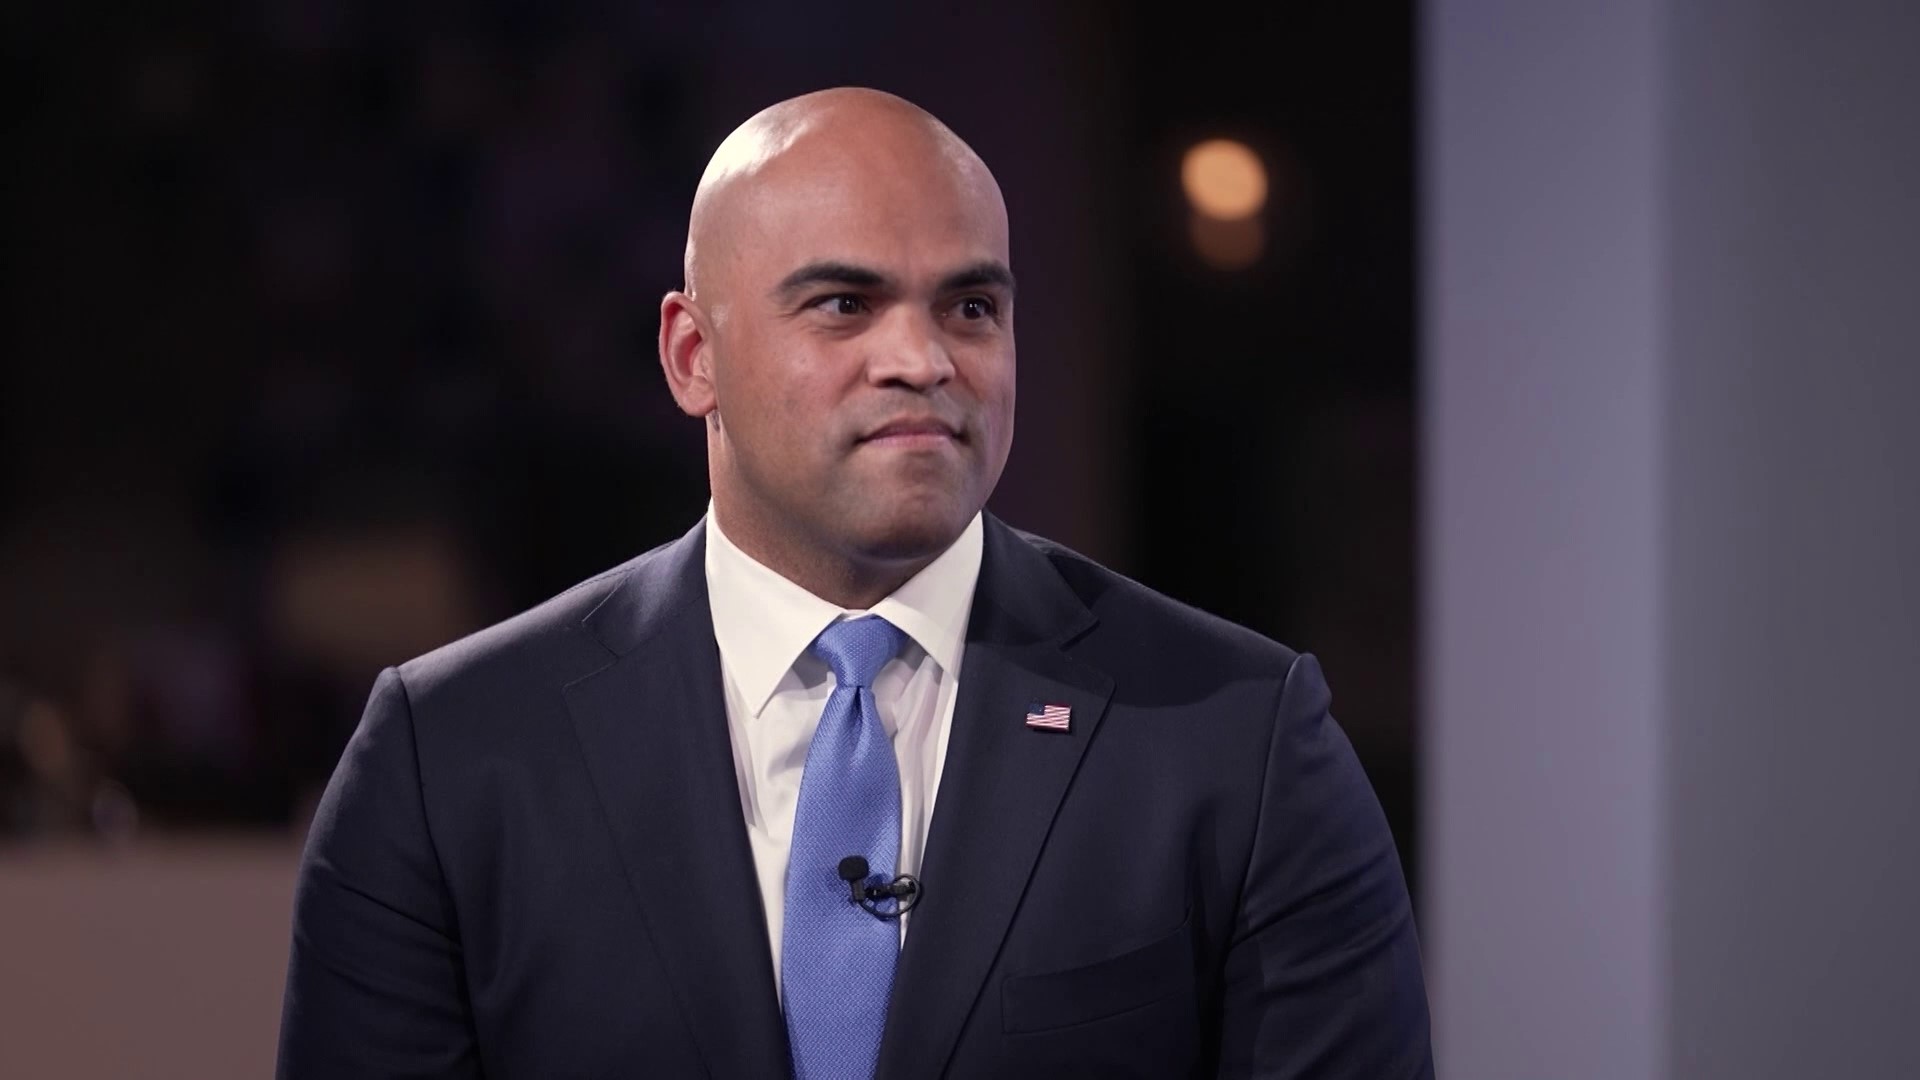 Congressman Colin Allred says he expects the issue of abortion rights to be a motivator for voters as he campaigns for U.S. Senate.